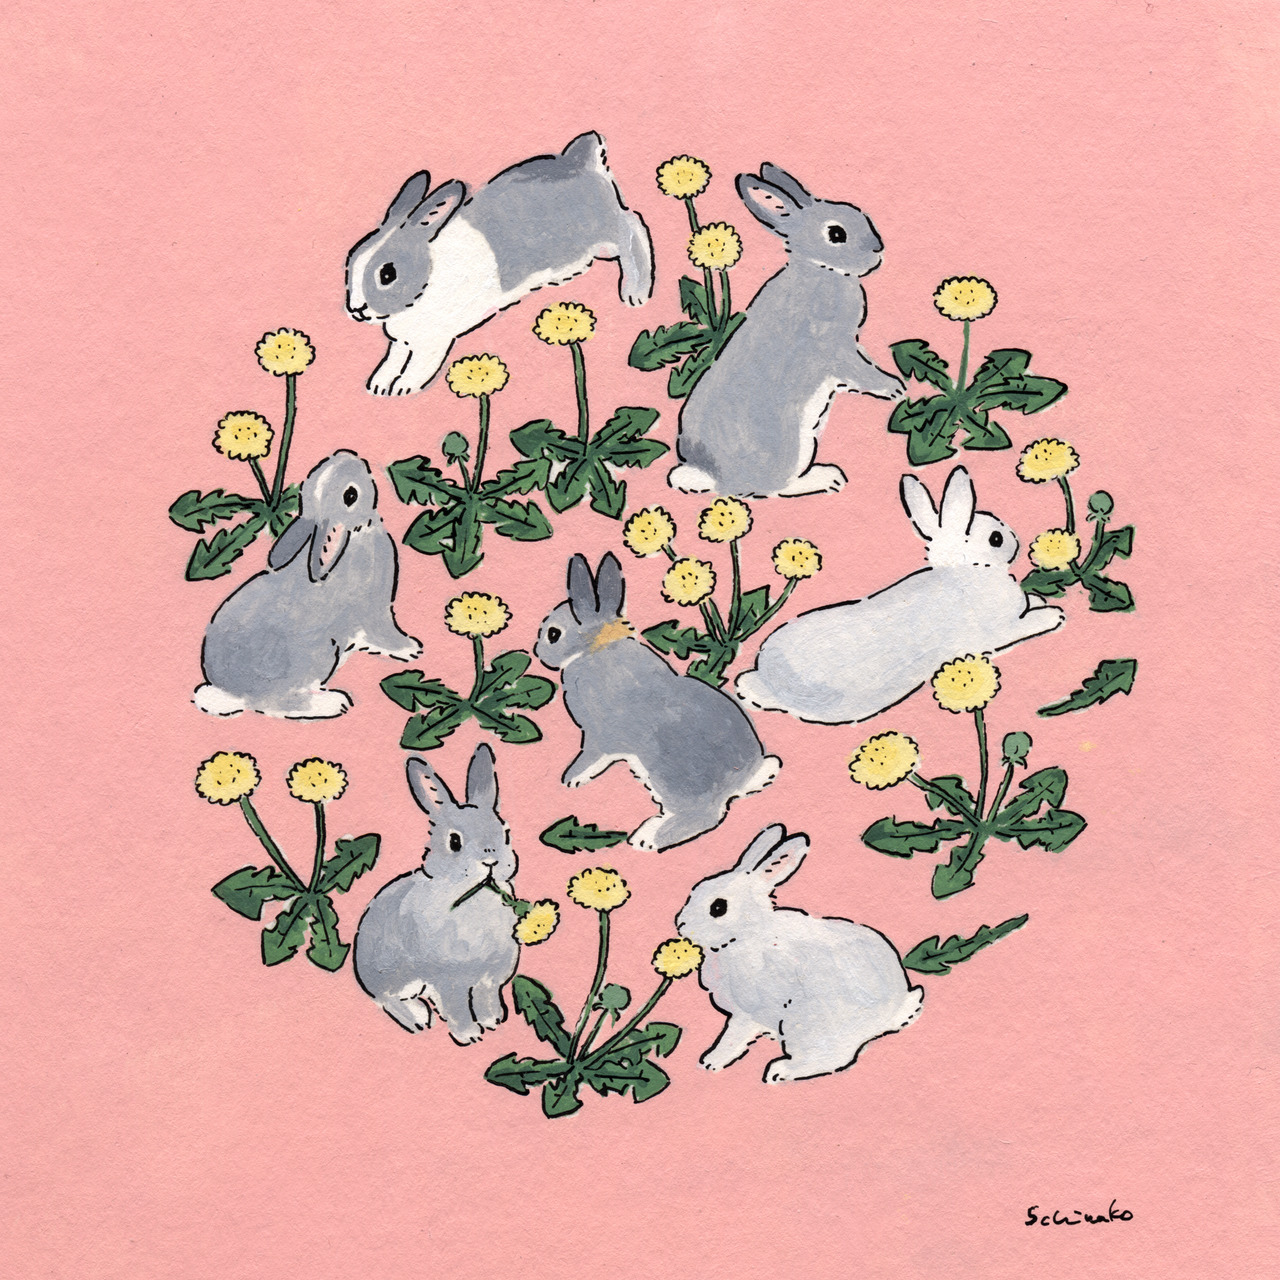 Schinako Bunny Art — I’m looking forward to that a dandelion blooms in...